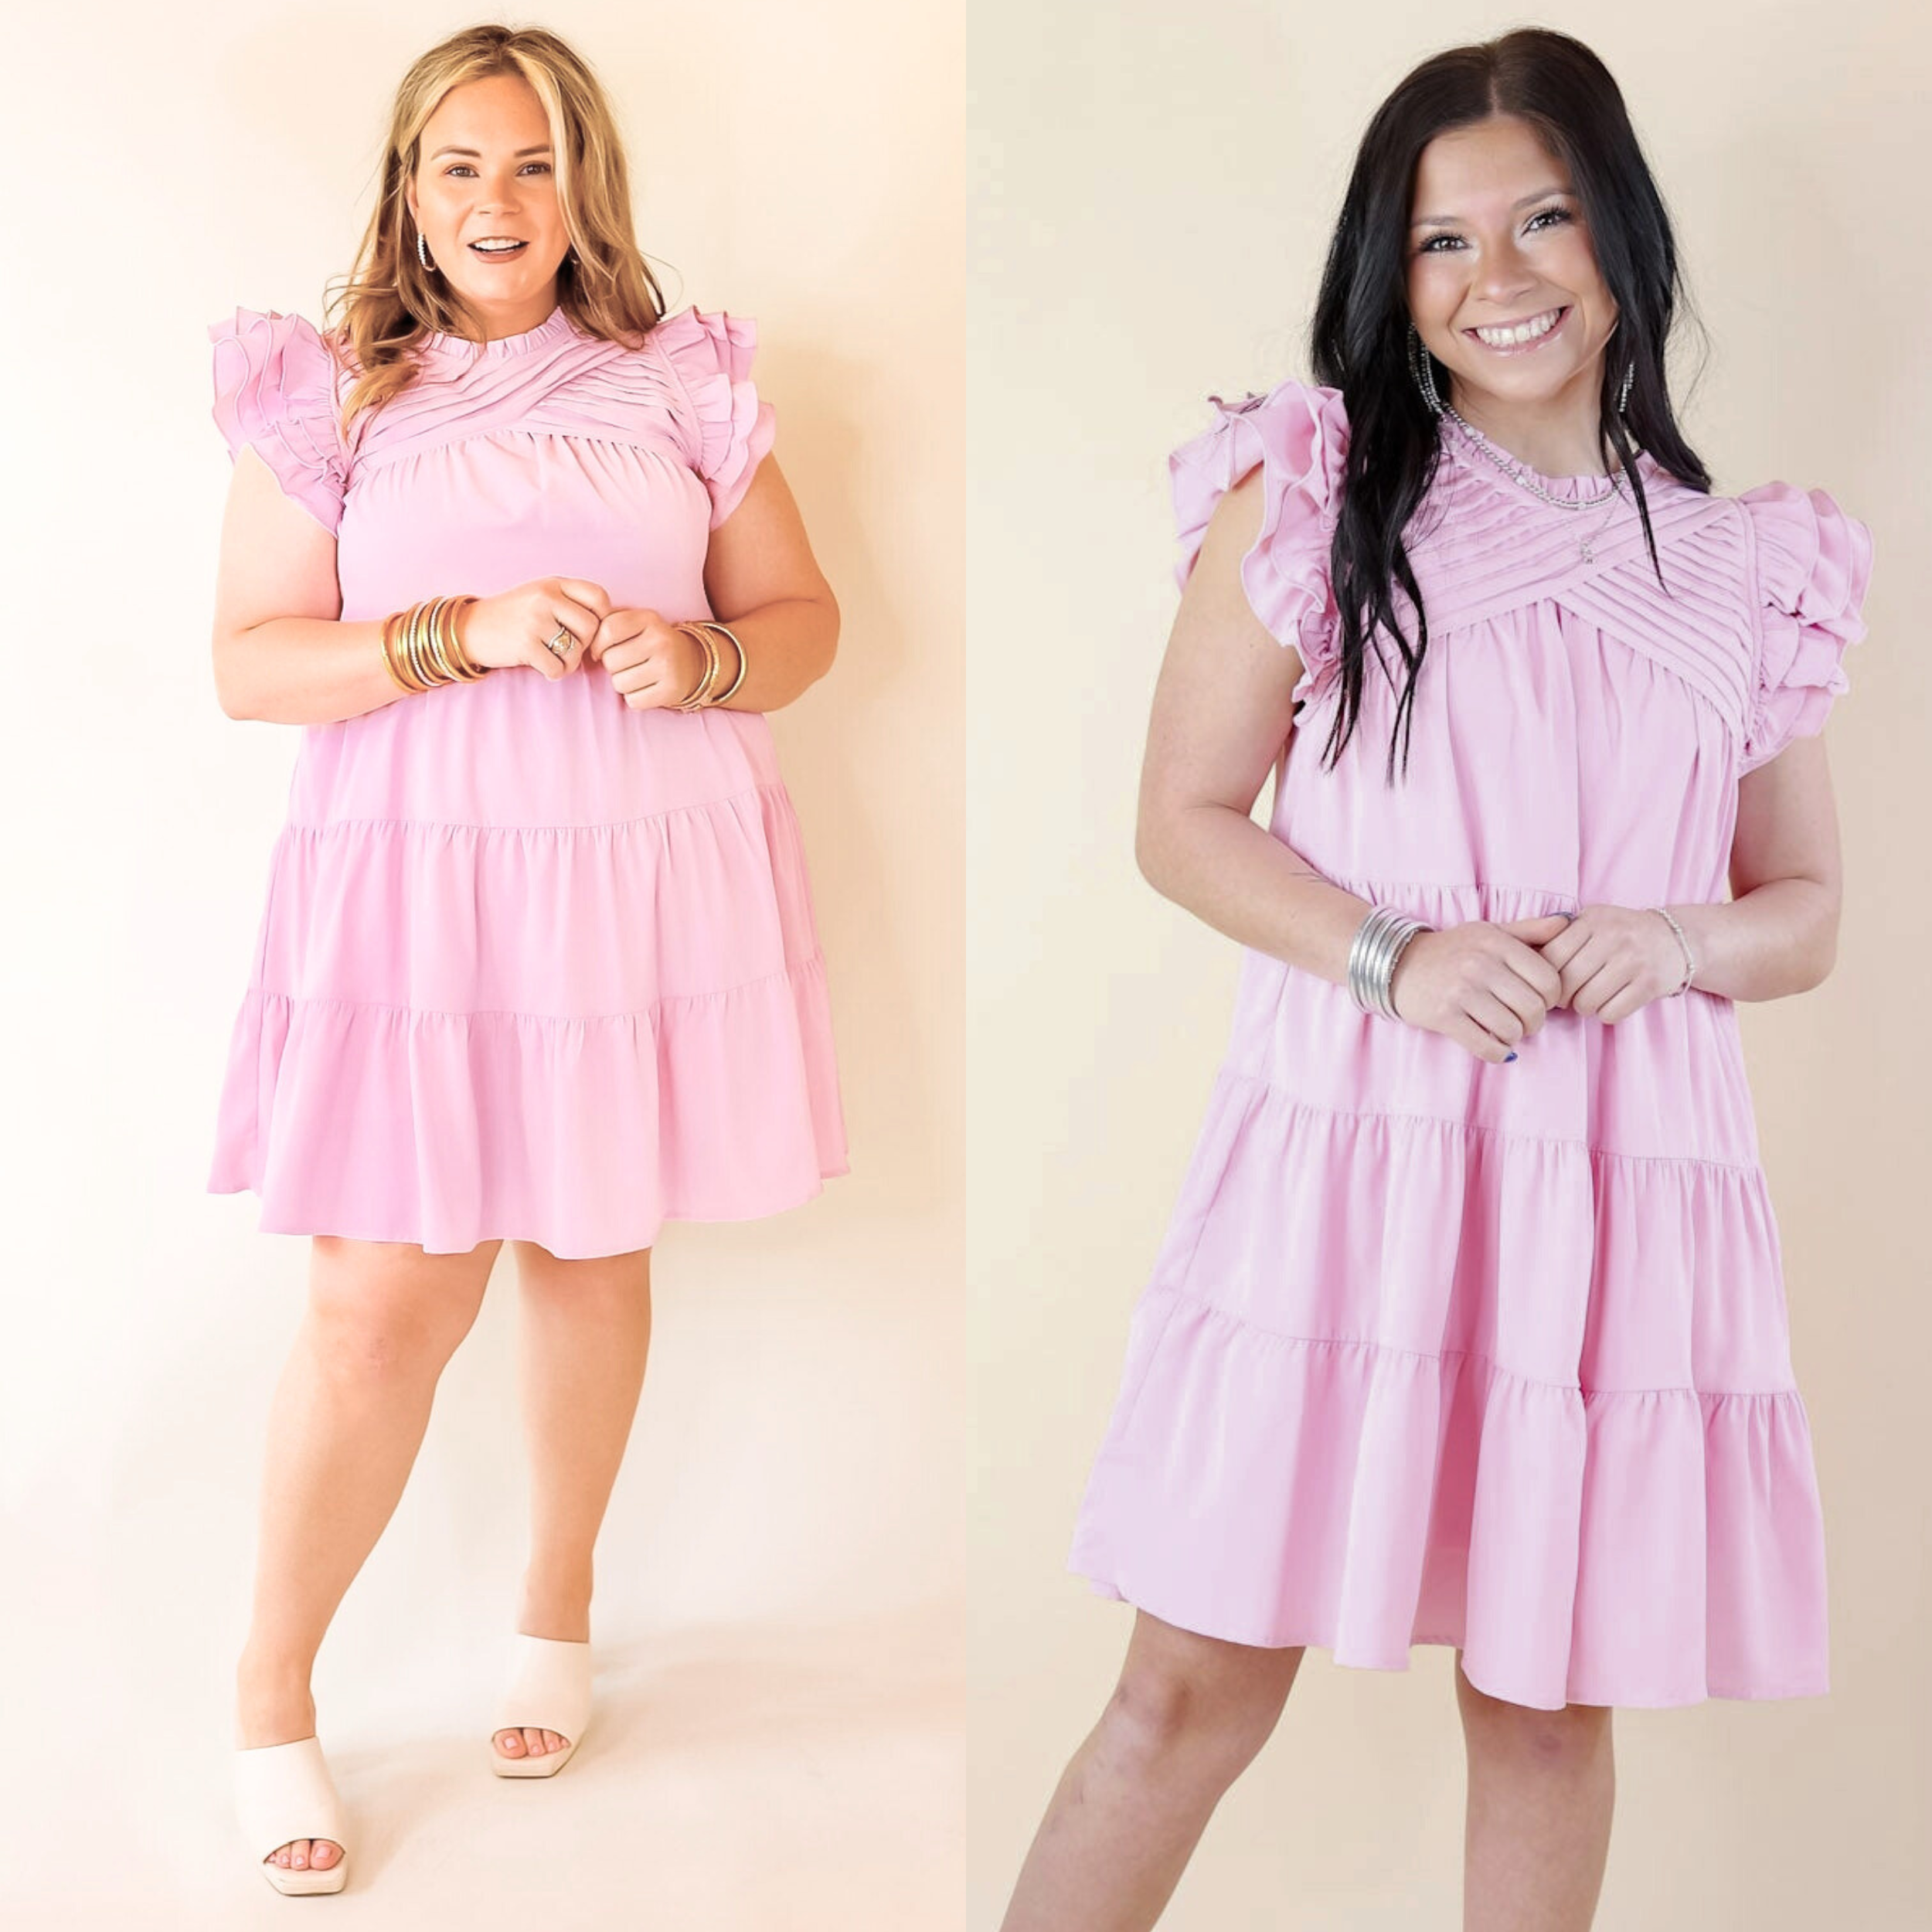 Chic On Scene Ruffle Tiered Dress with Pleated Detailing in Light Pink - Giddy Up Glamour Boutique